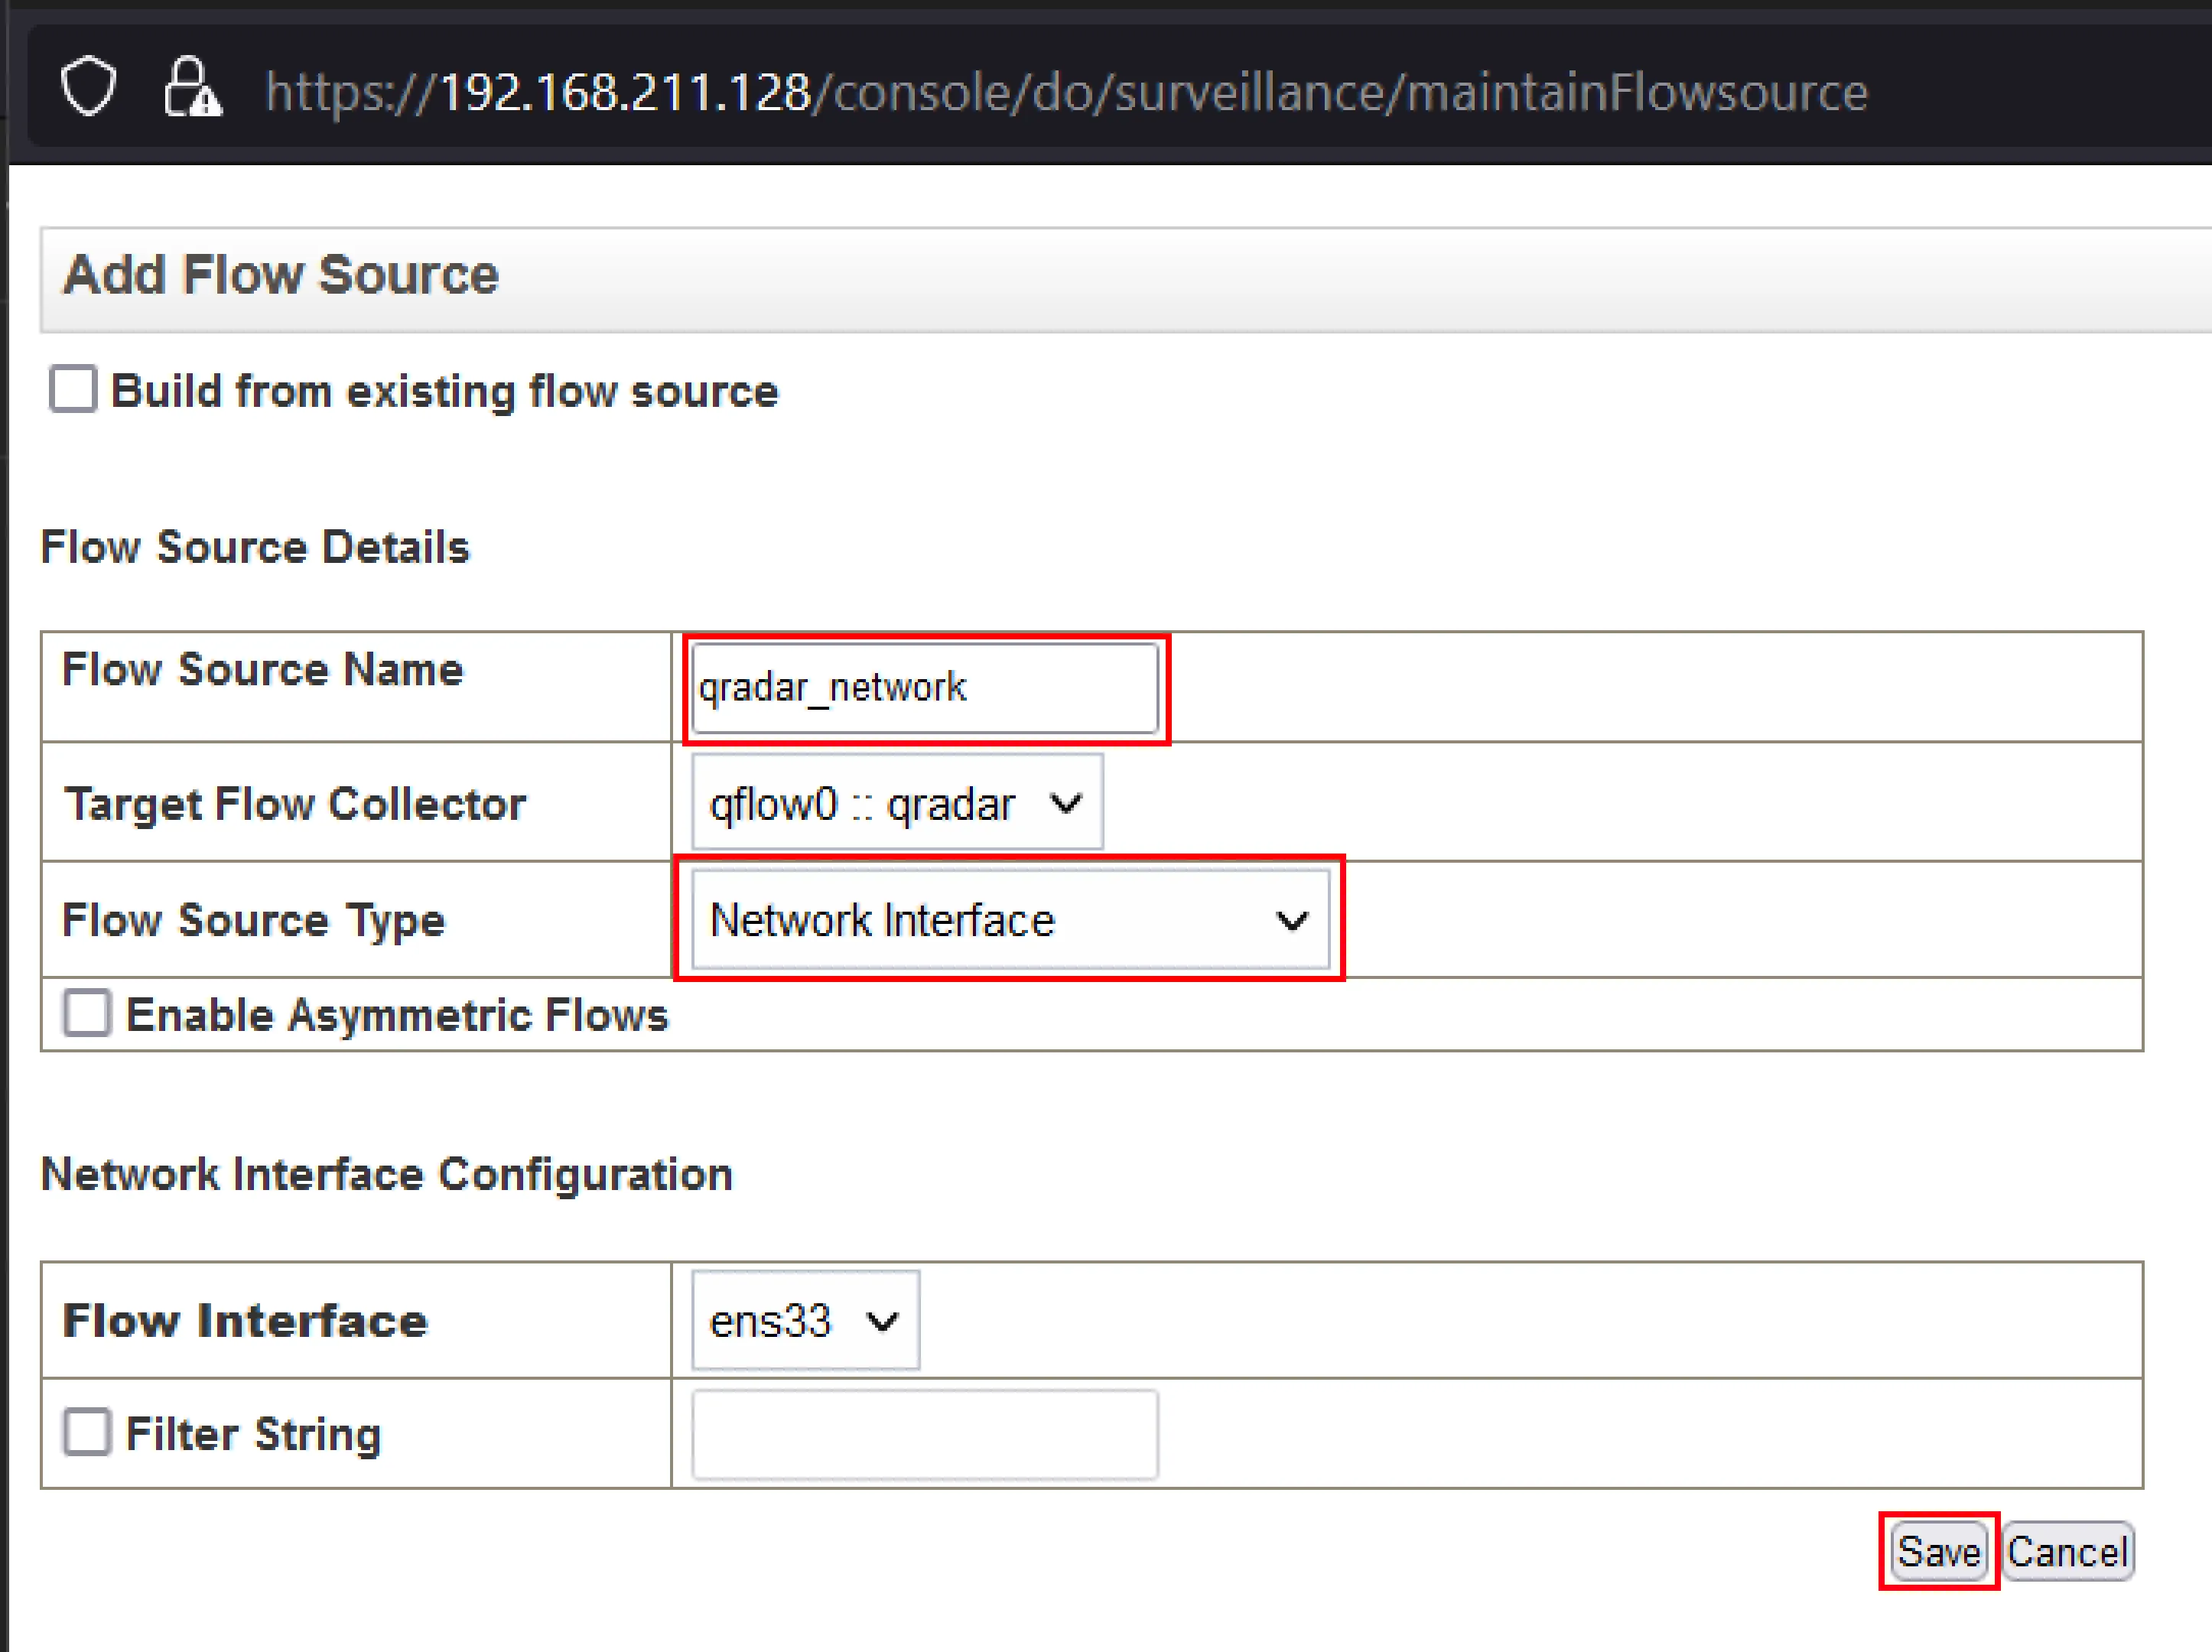 Set the Flow Source Name to qradar_network and set the Flow Source Type to Network Interface and click Save